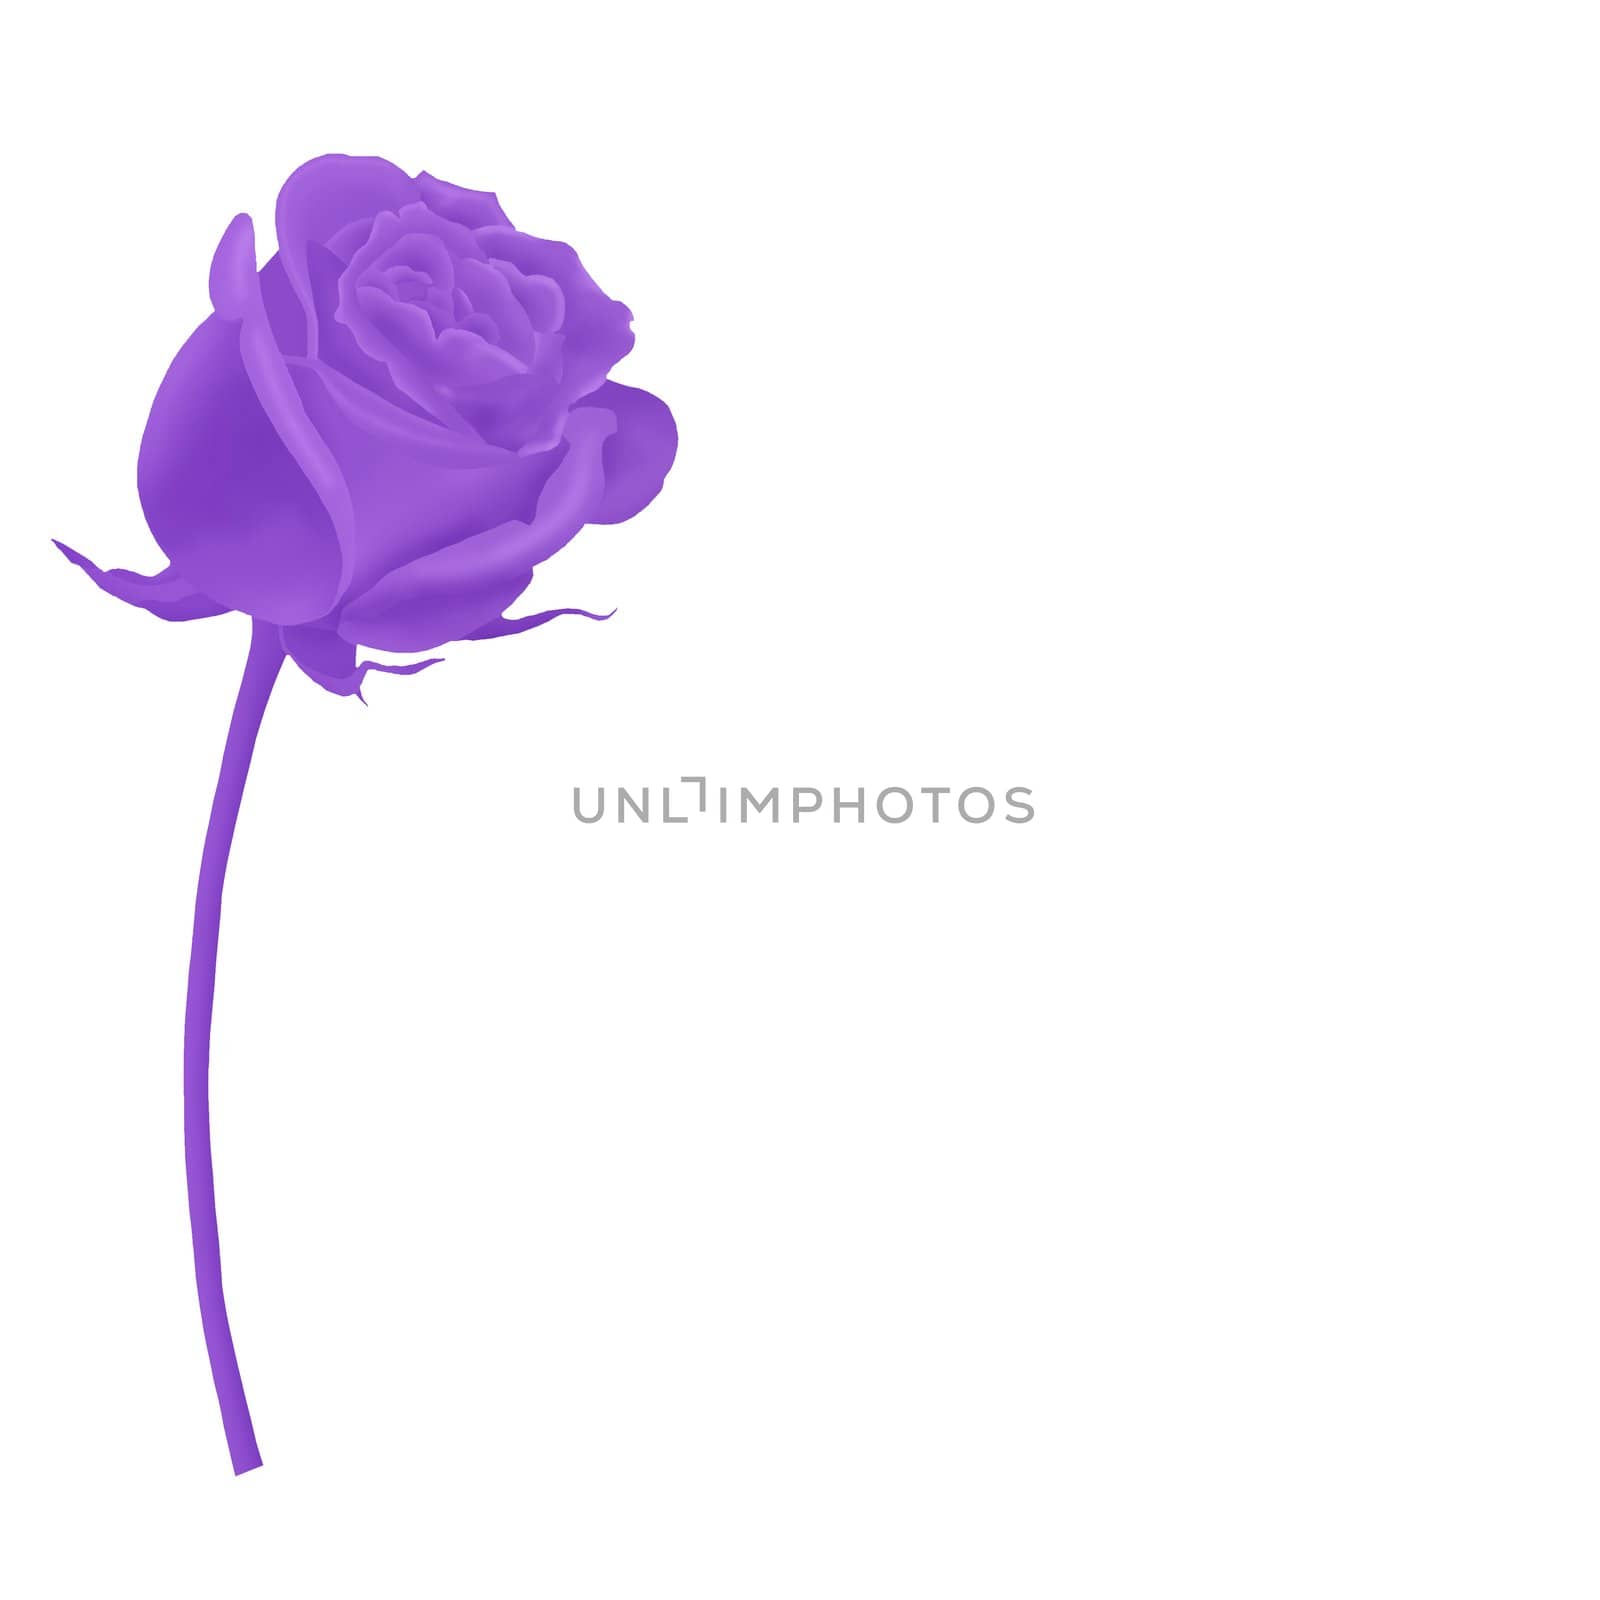 Birthday card for Mum with a single purple rose isolated on a white background